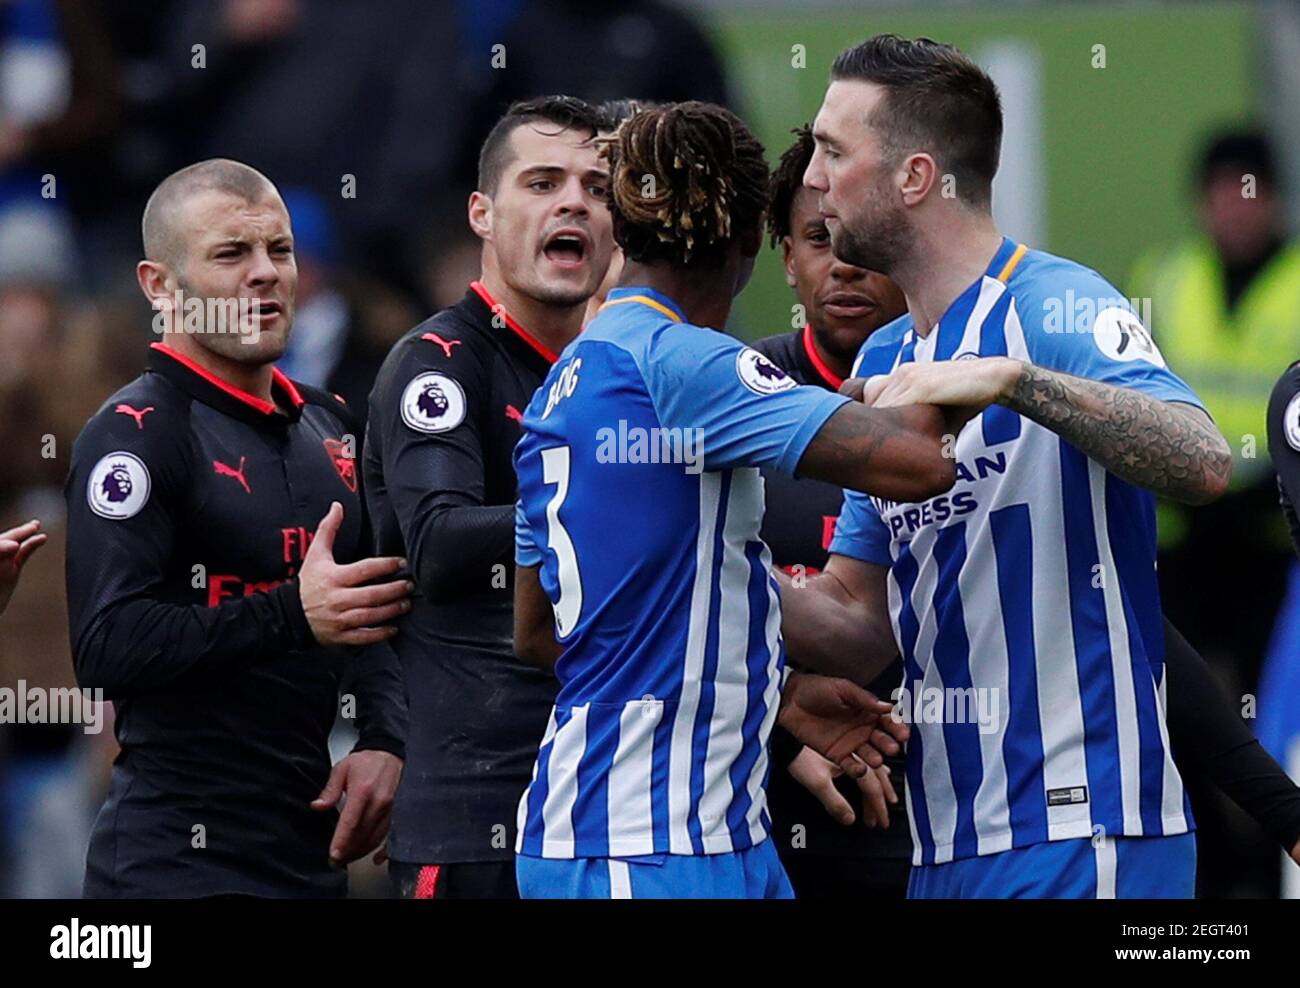 Soccer Football - Premier League - Brighton & Hove Albion vs Arsenal - The American Express Community Stadium, Brighton, Britain - March 4, 2018    Arsenal's Granit Xhaka and Jack Wilshere clash with Brighton's Gaetan Bong after Ezequiel Schelotto sustained an injury in a challenge with Arsenal's Sead Kolasinac    REUTERS/Eddie Keogh    EDITORIAL USE ONLY. No use with unauthorized audio, video, data, fixture lists, club/league logos or 'live' services. Online in-match use limited to 75 images, no video emulation. No use in betting, games or single club/league/player publications.  Please conta Stock Photo